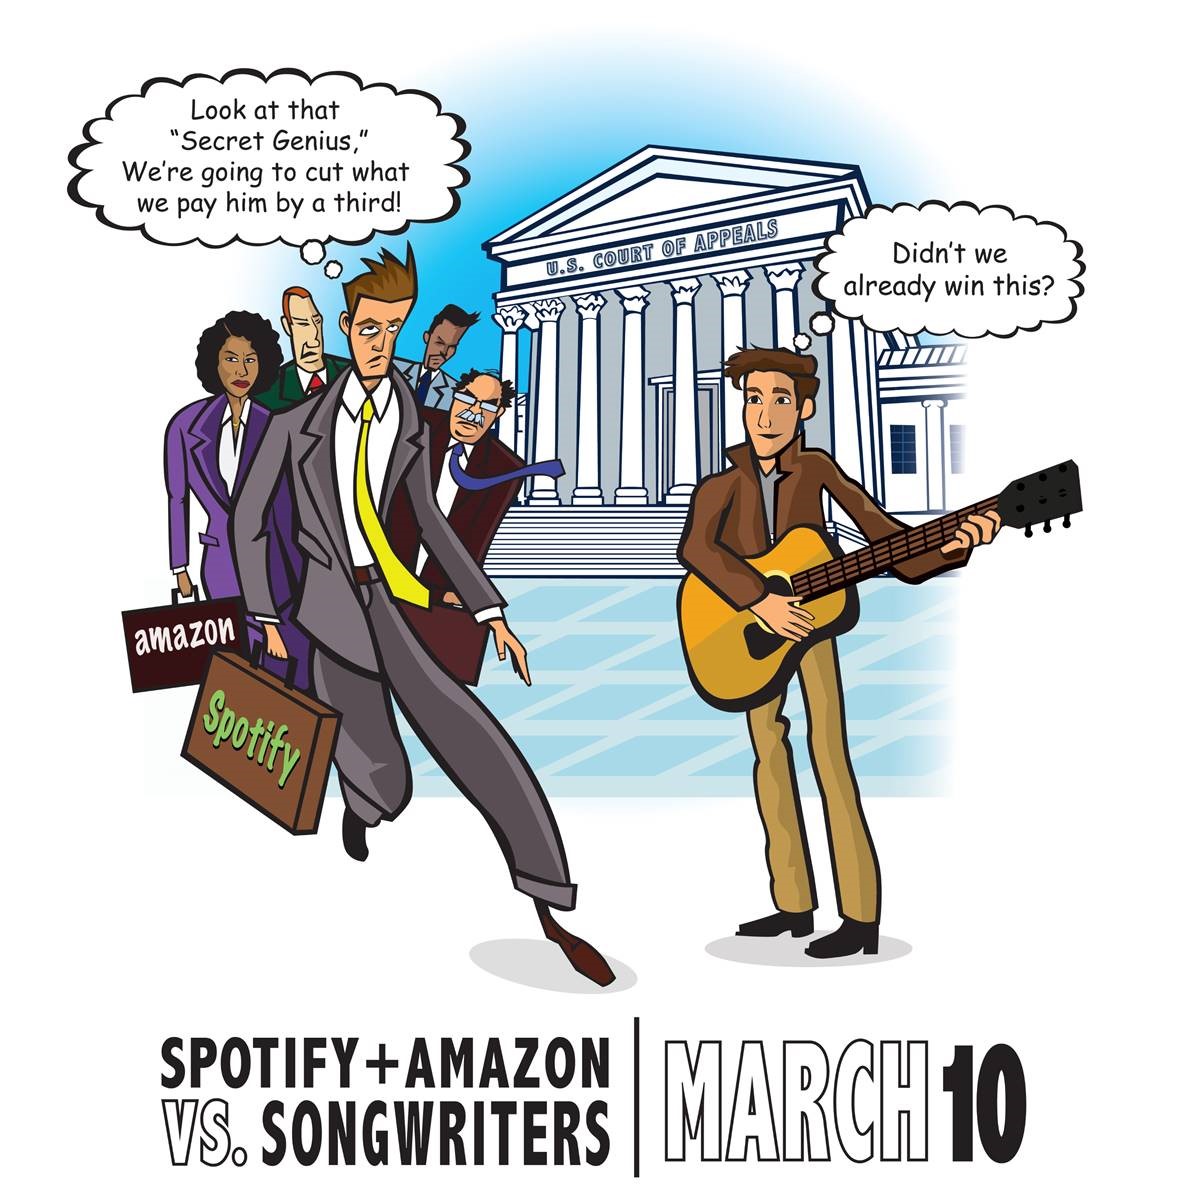 Calling all Songwriters!! ⚠️Did you know that #Spotify and #Amazon are taking you to court on March 10? They want to appeal your 44% raise in the CRB. Spread the word to increase awareness, and let these companies know to #StopFightingSongwriters! 🎵🎤